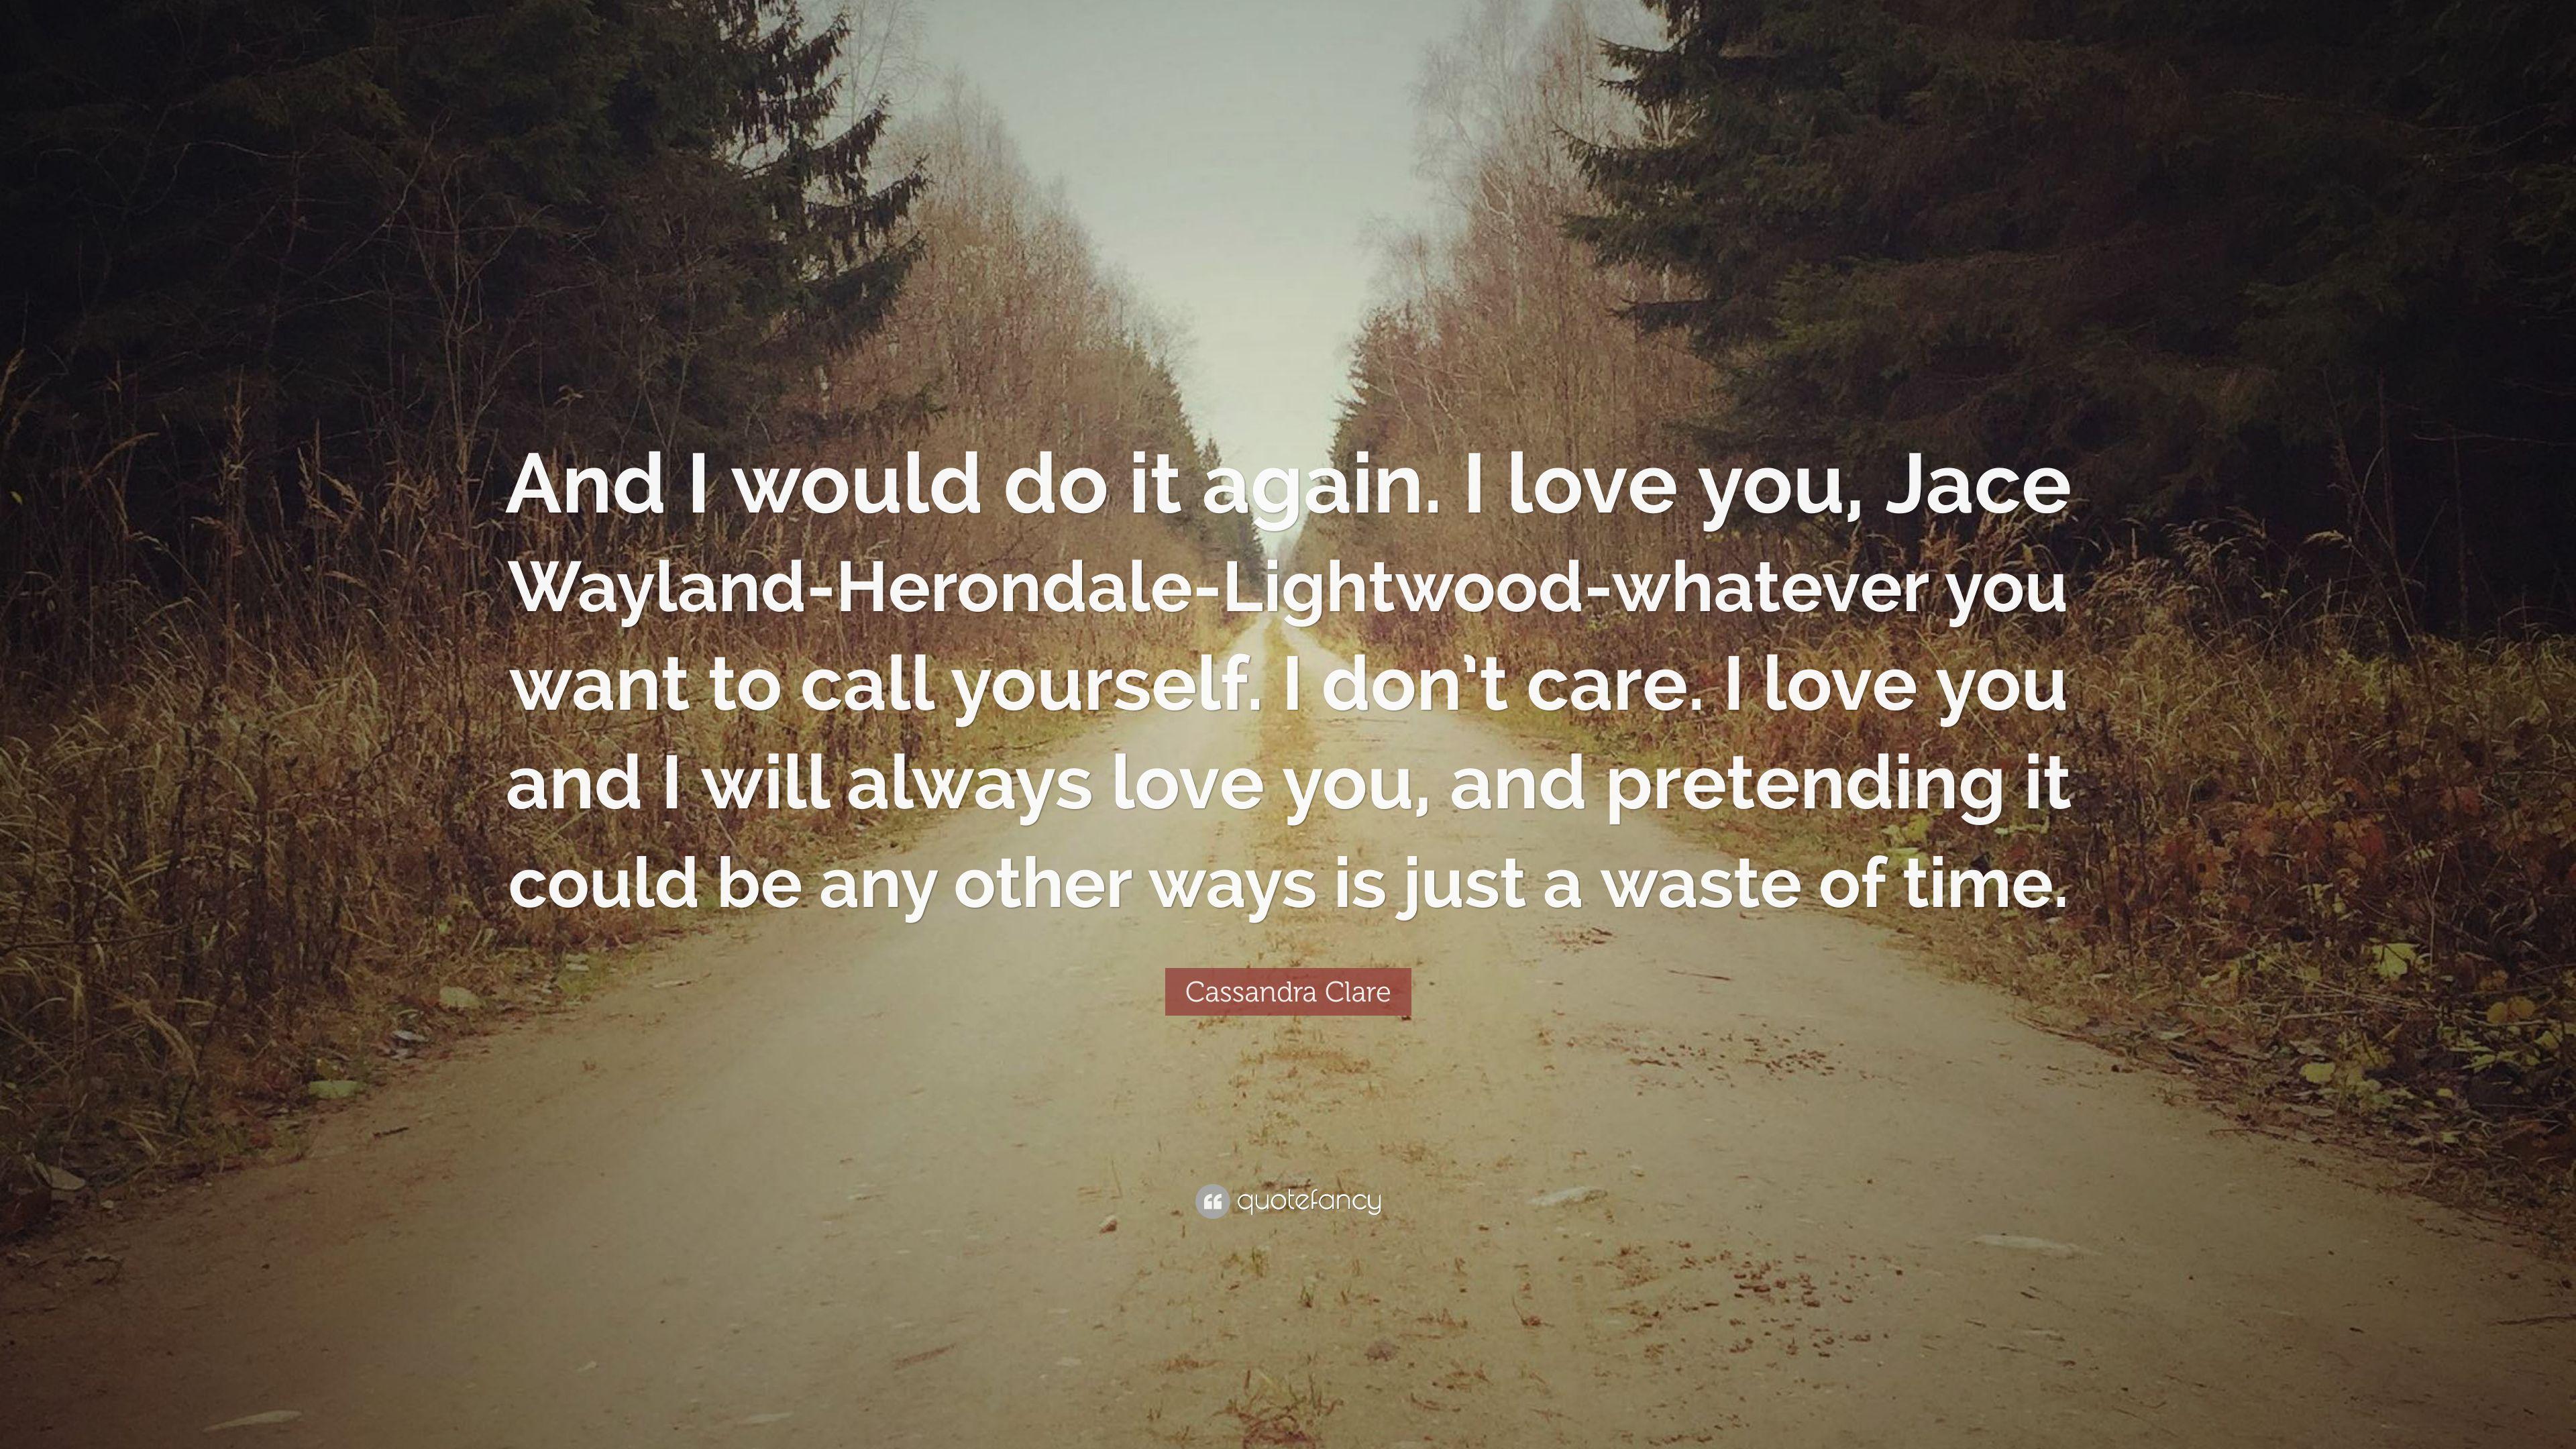 Cassandra Clare Quote: “And I would do it again. I love you, Jace